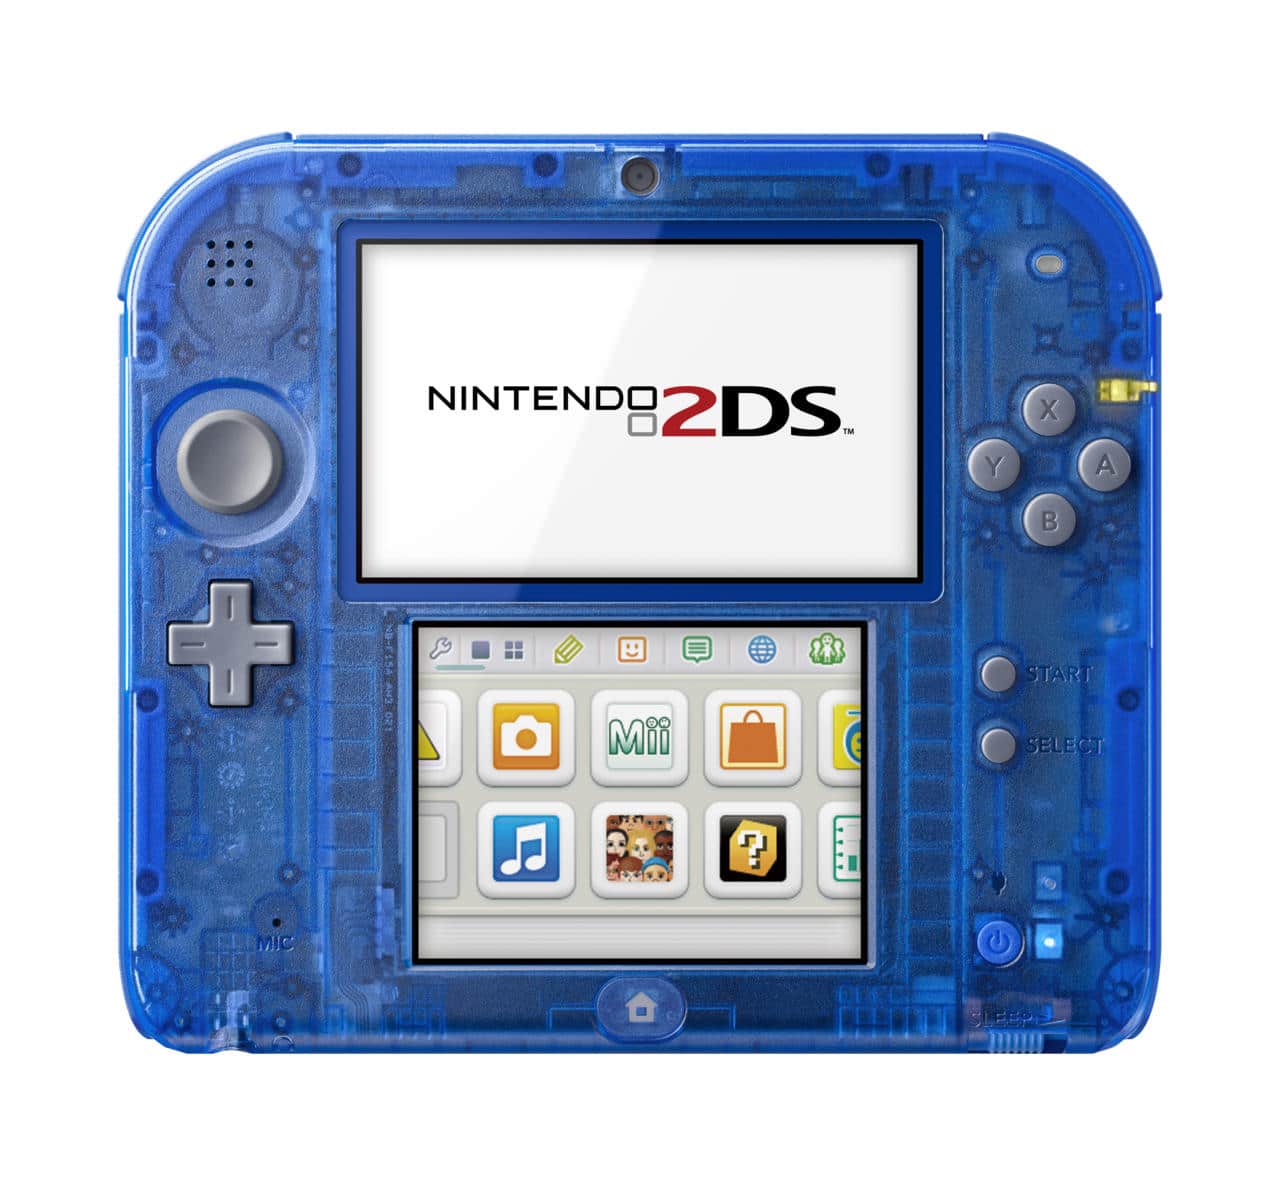 2DS See Through Translucent Crystal Blue Color 2014